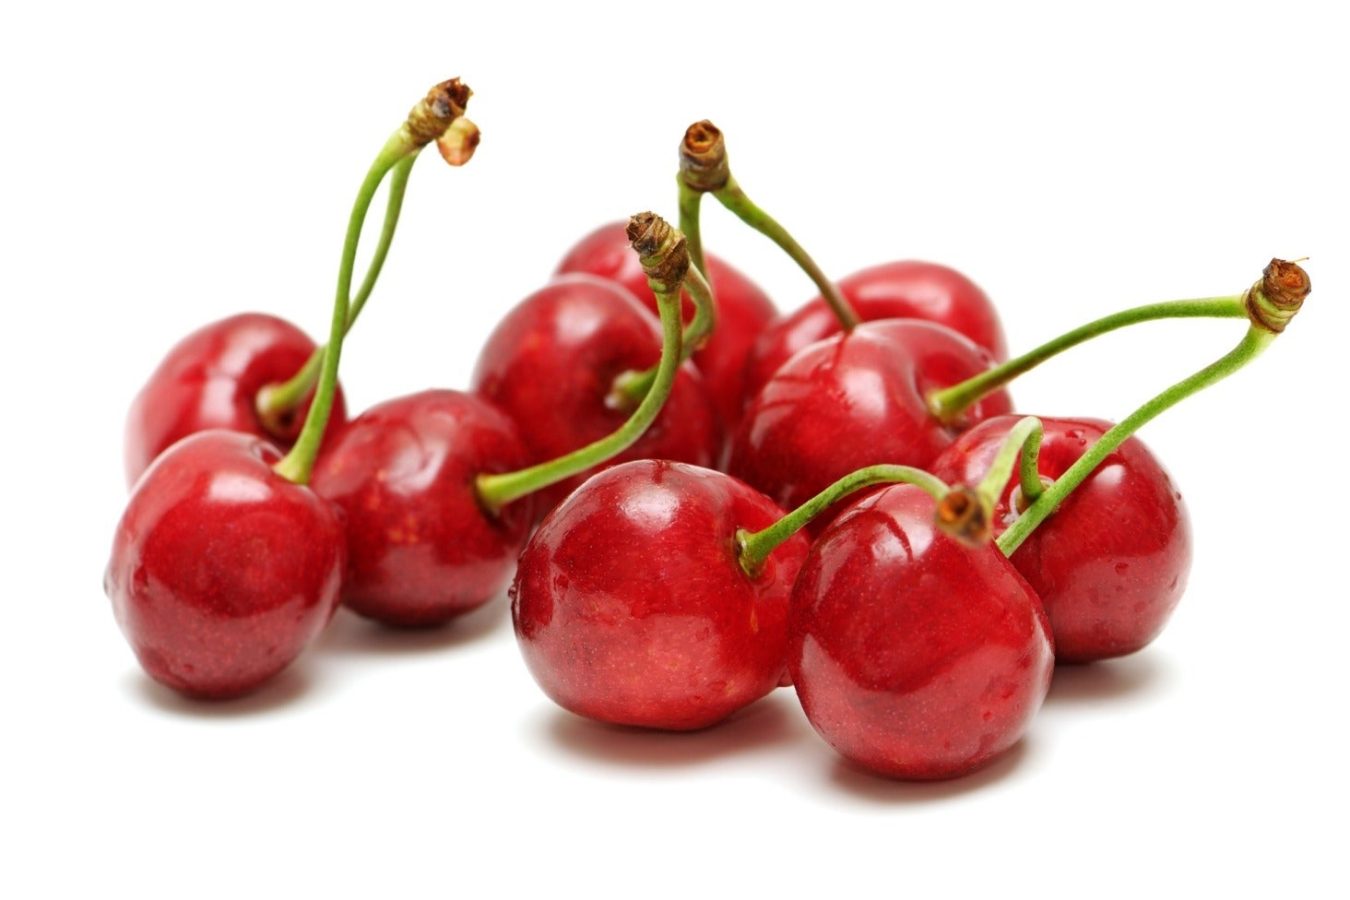 <strong>Nutritional Benefits of Cherries</strong>